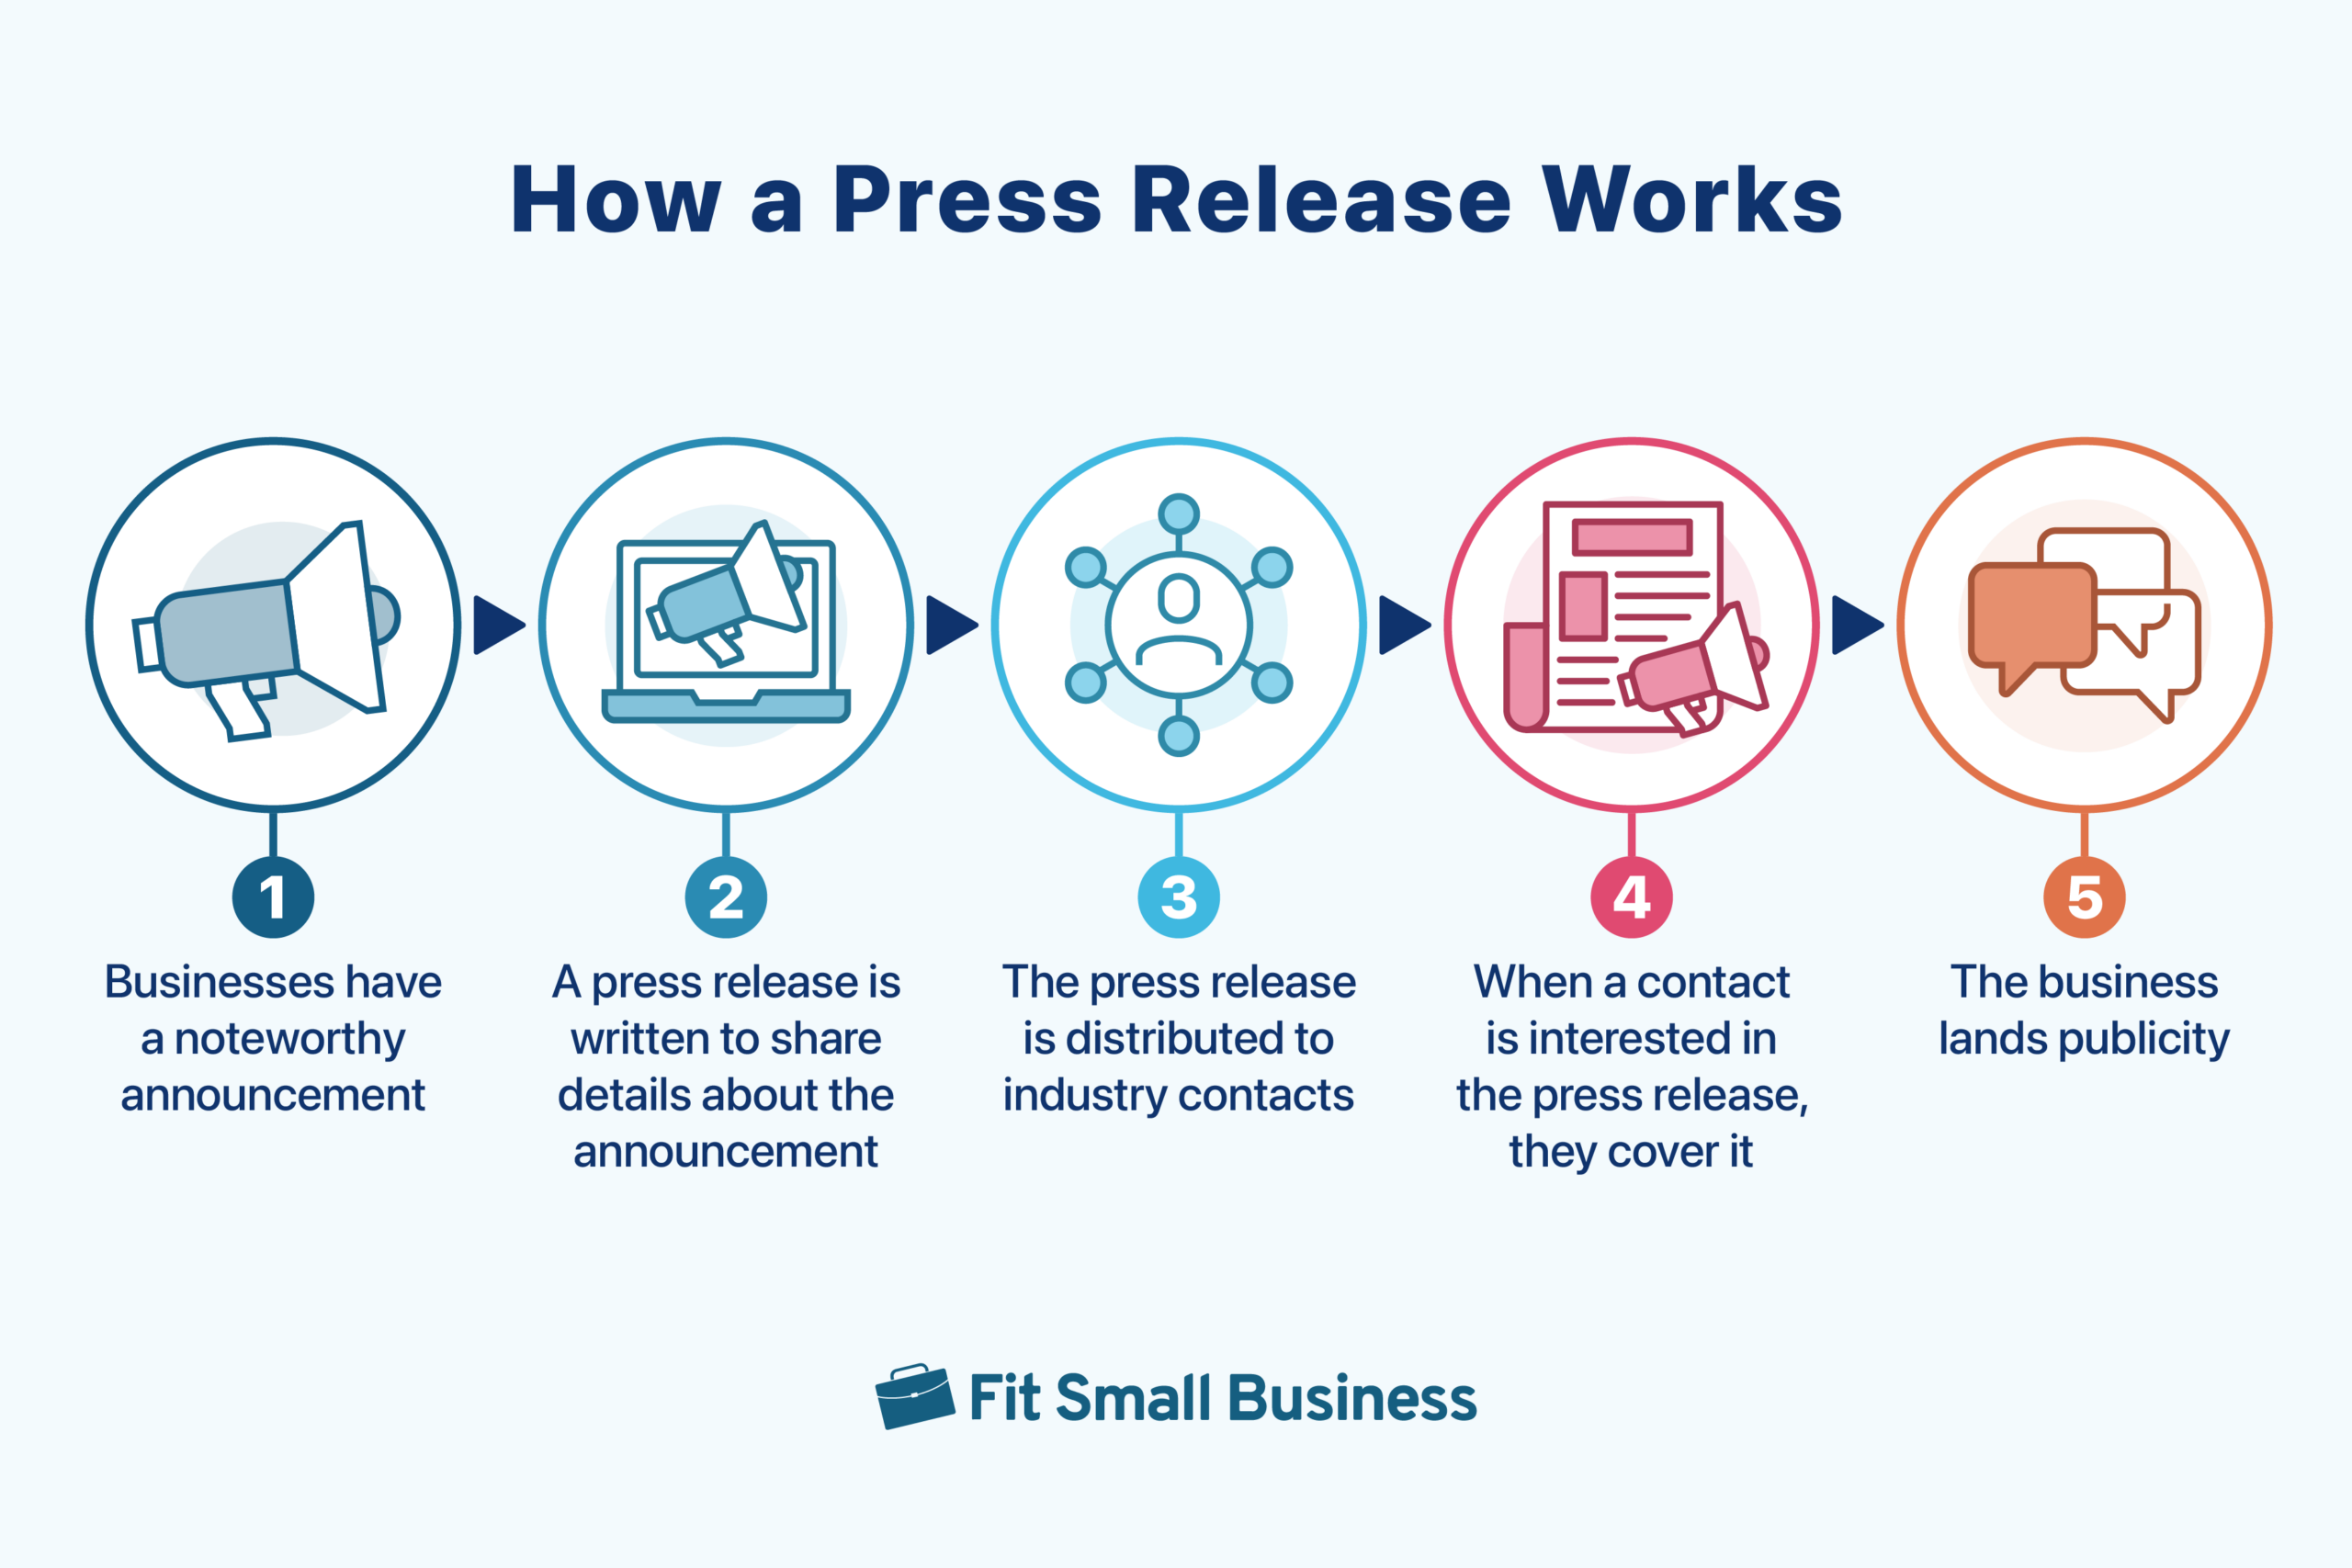 Infographic, showing how a press release works in five steps.